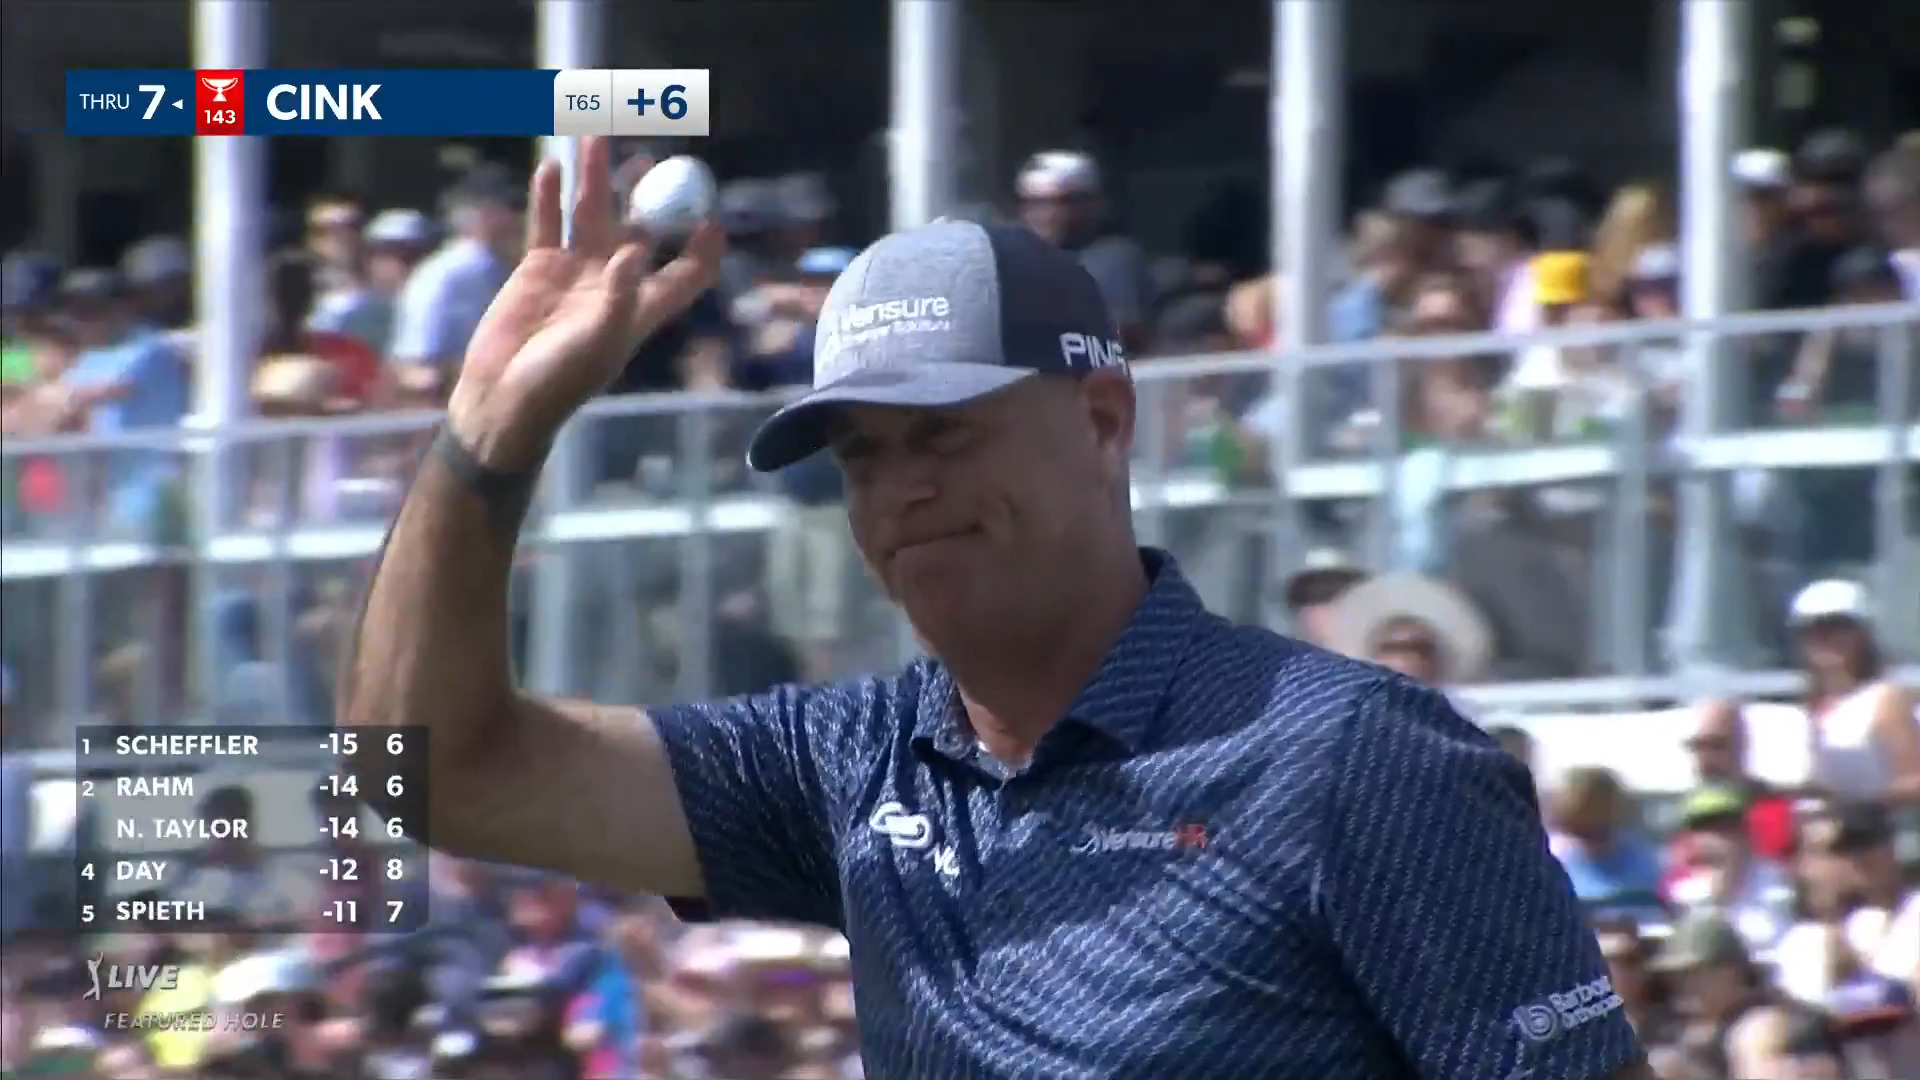 Stewart Cink dons a brand-new Suns Kevin Durant jersey at the